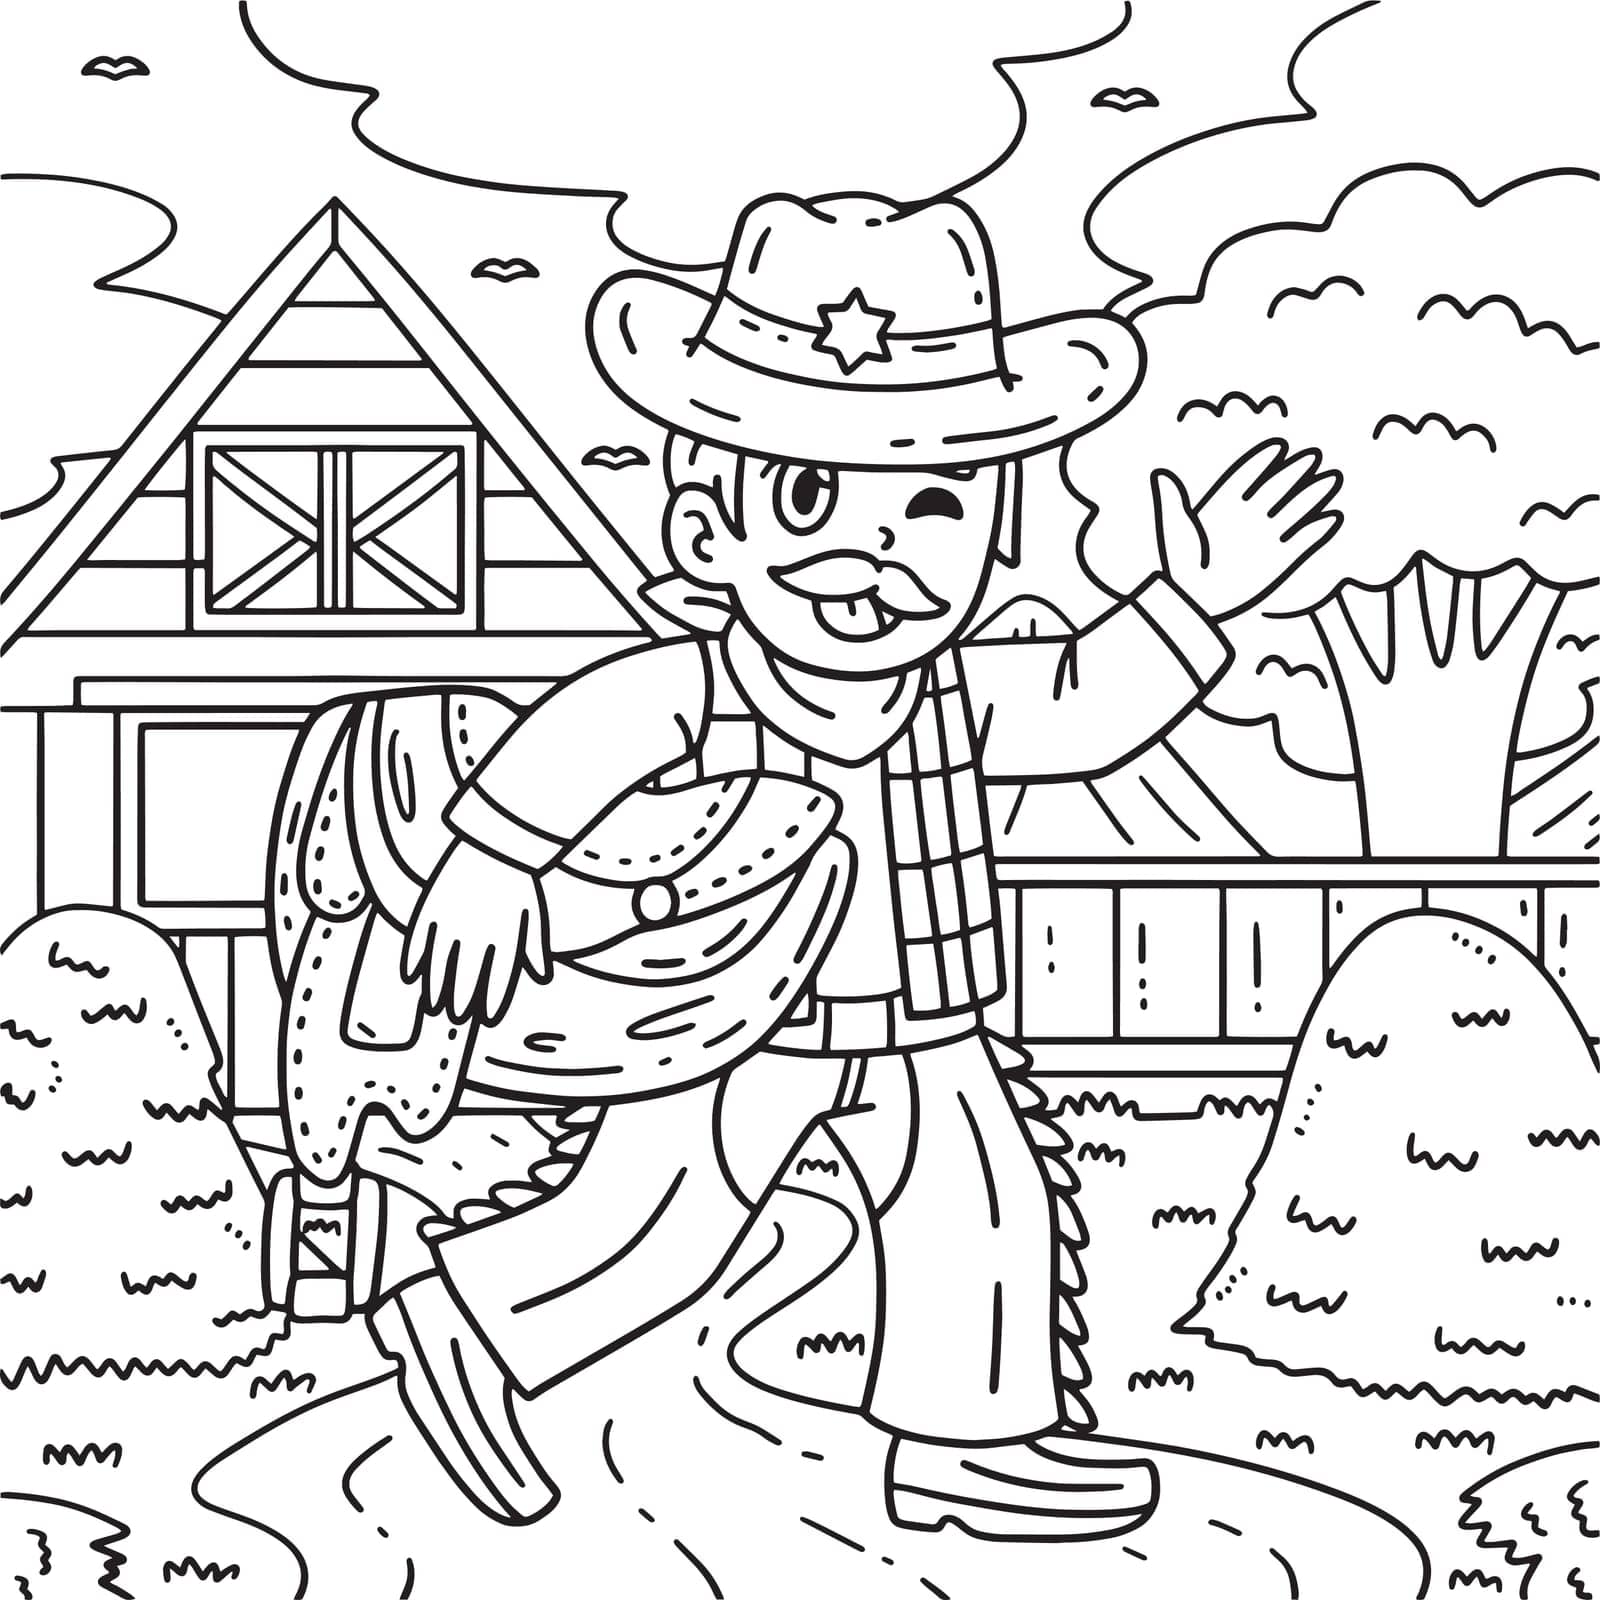 A cute and funny coloring page of a Cowboy Carrying Saddle. Provides hours of coloring fun for children. To color, this page is very easy. Suitable for little kids and toddlers.